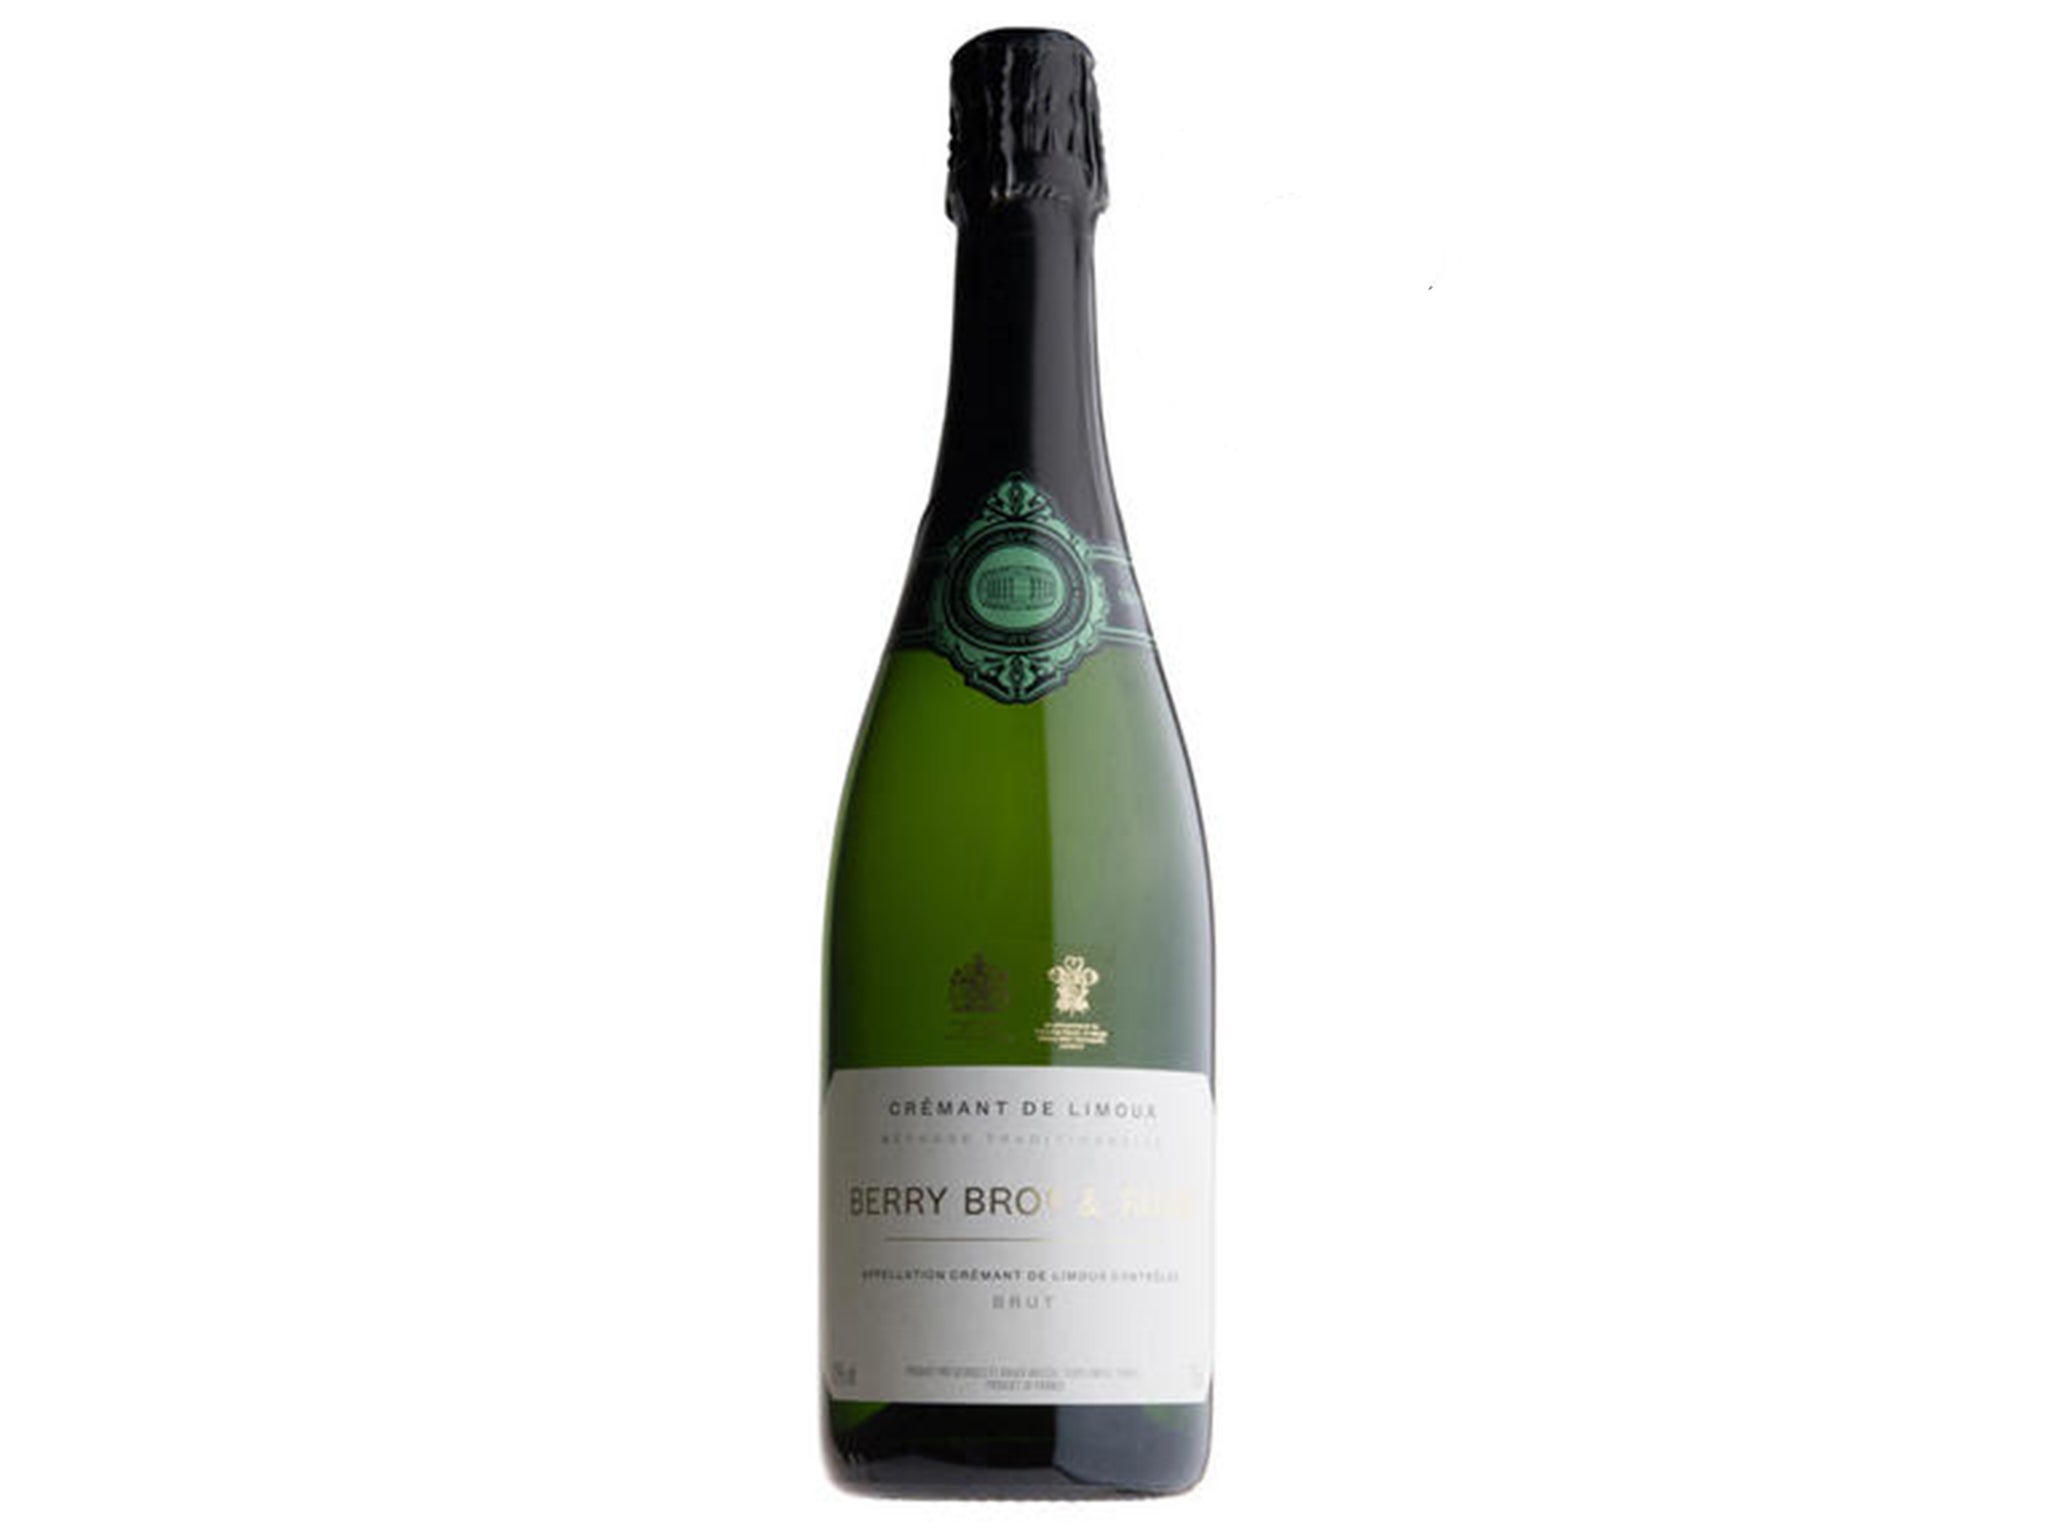 This Crémant de Limoux bottle is a blend of orchard fruit and honeyed spice